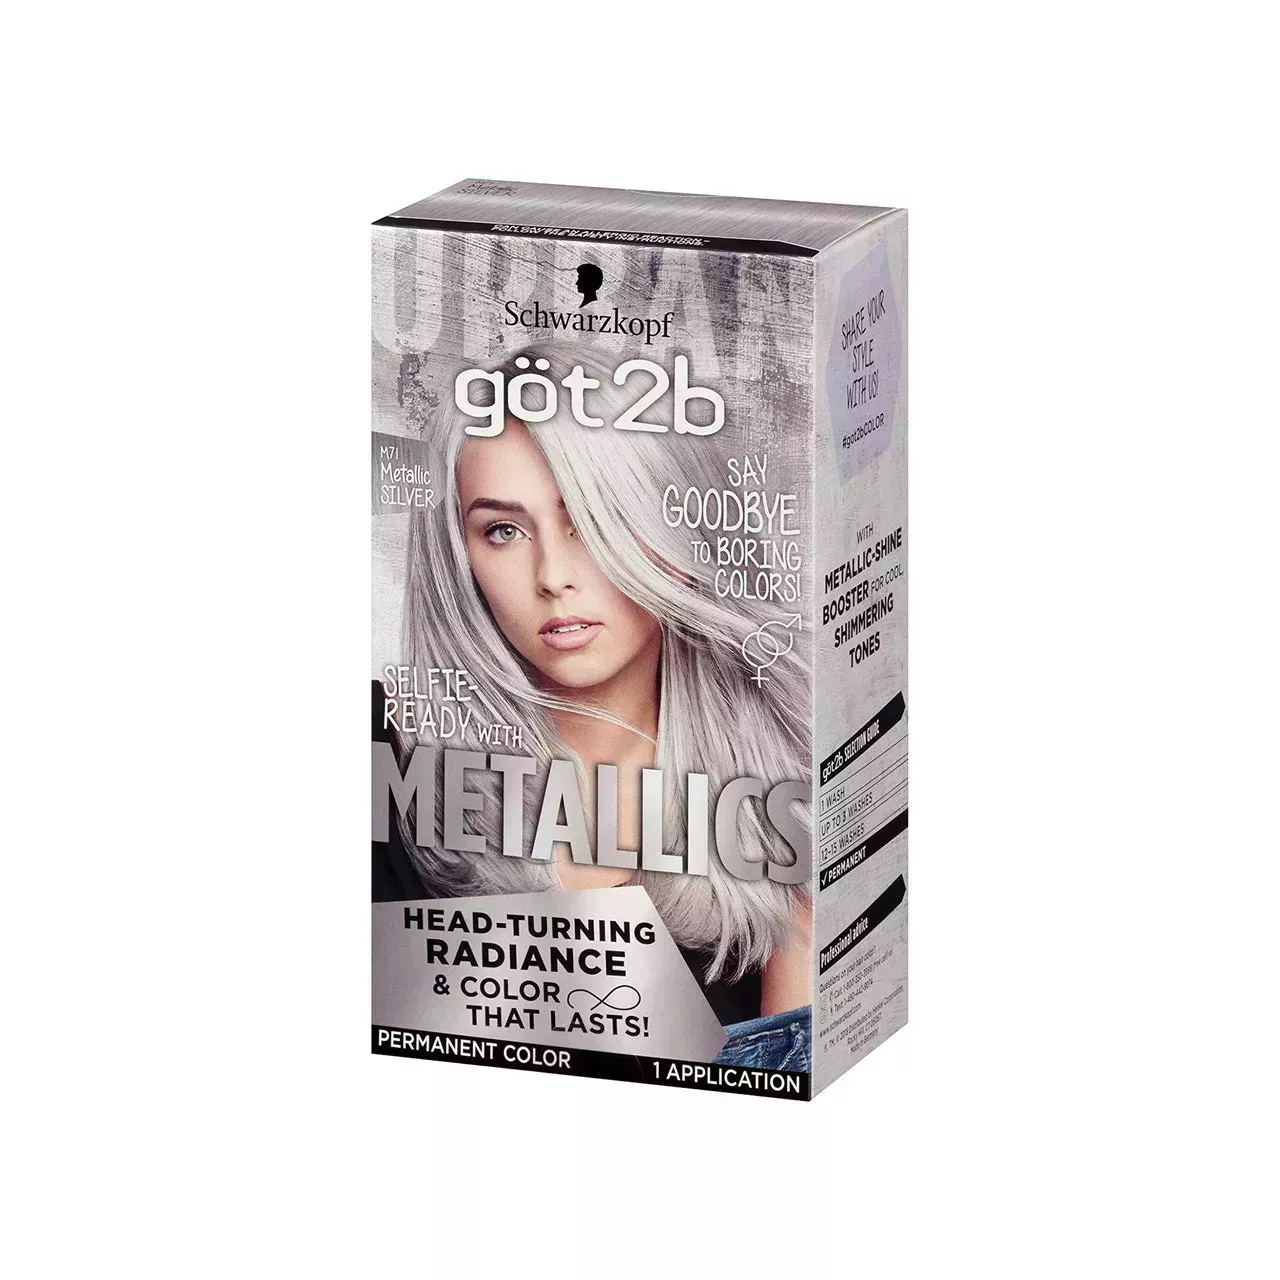 box of Göt2B Metallics Permanent Hair Color in Metallic Silver on white background